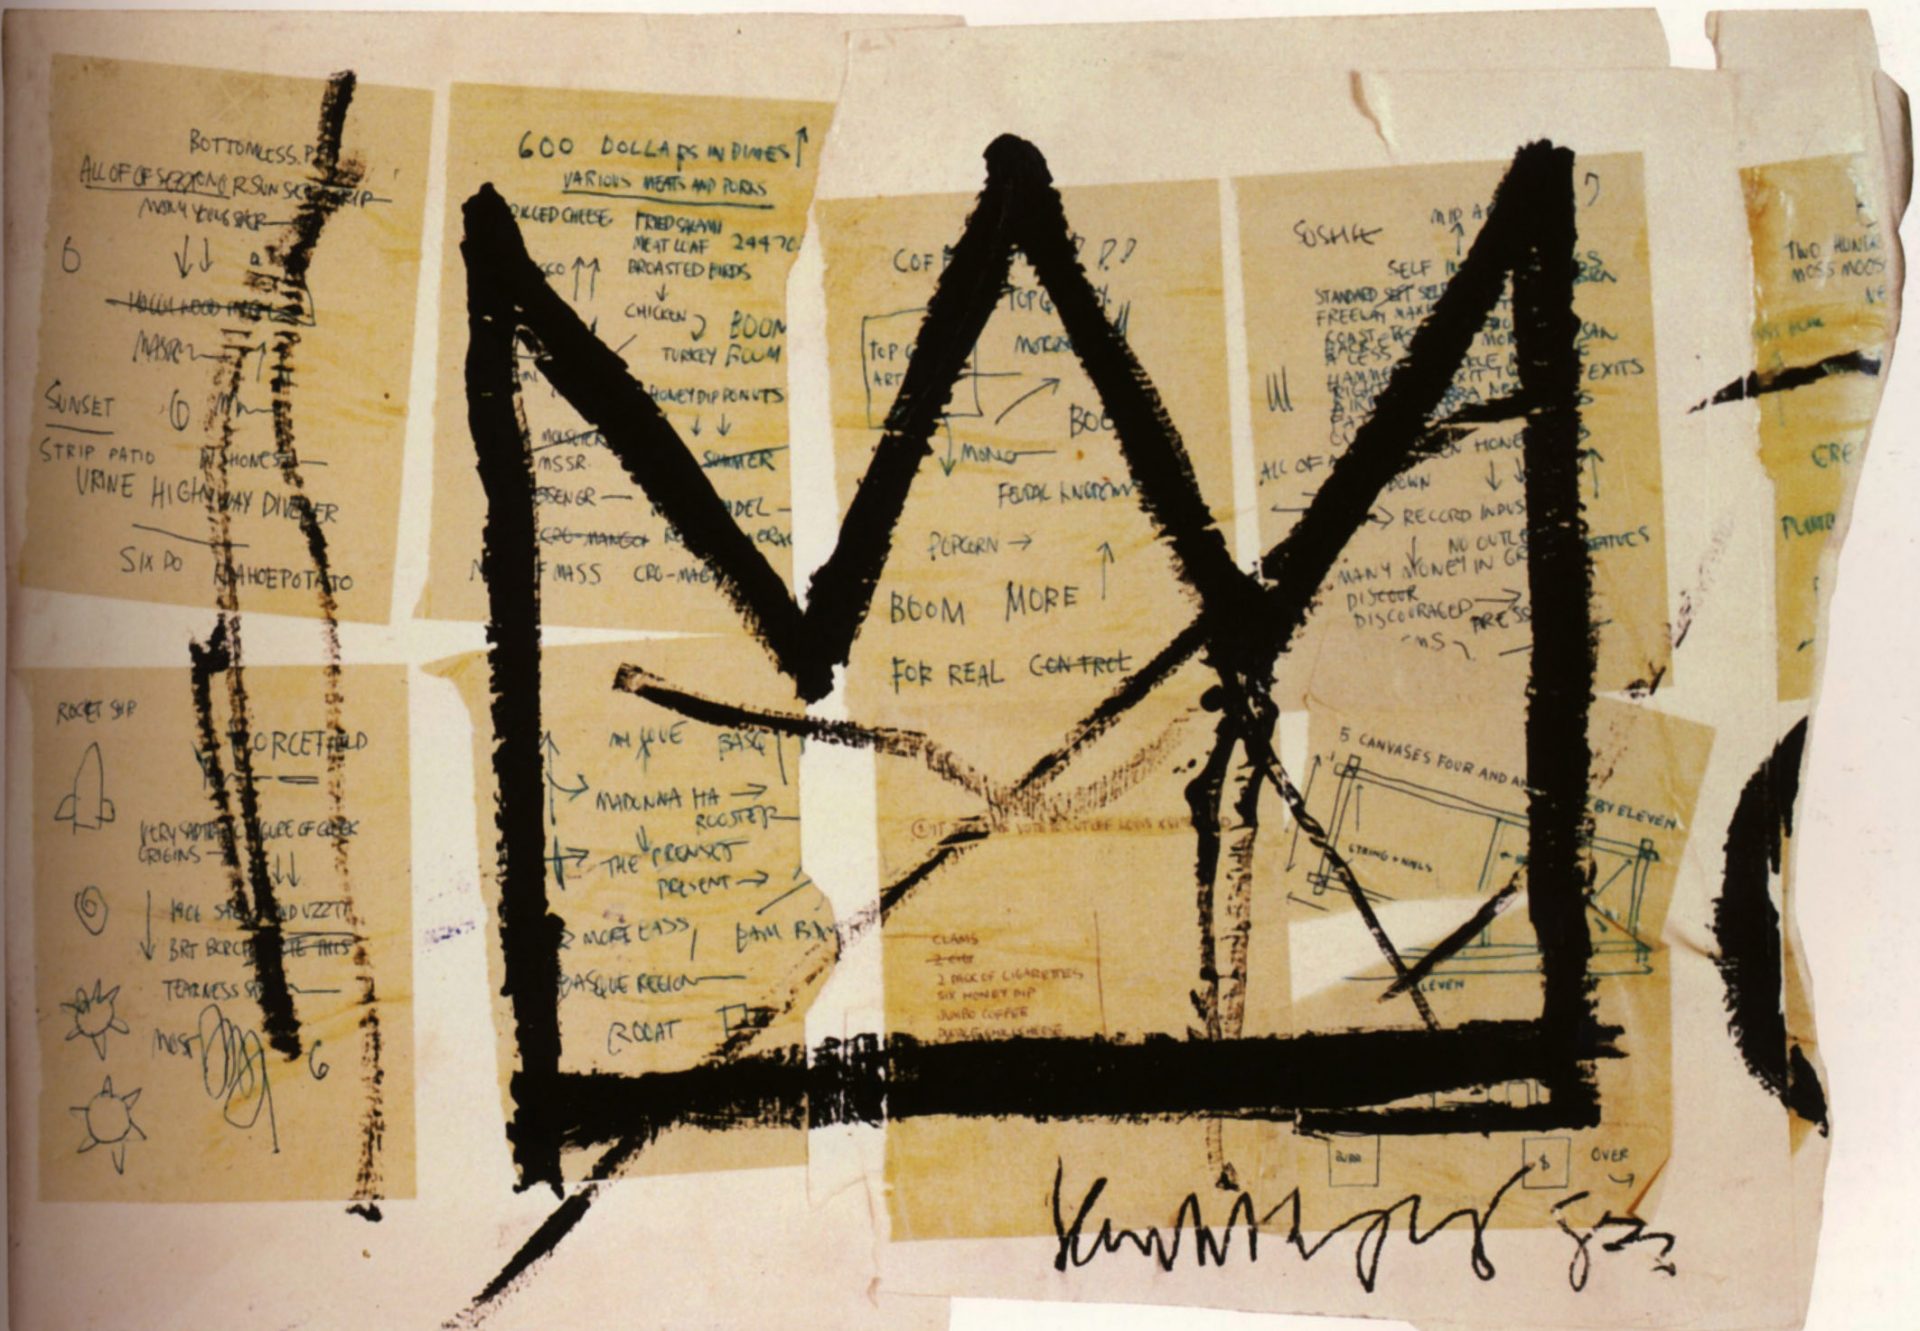 An abstract composition predominantly featuring the artist's signature icon—the three-pointed crown. The crown is sketched in bold black, set against a backdrop of seemingly random strokes, letters and symbols in contrasting hues, contributing further to the abstract and intense imagery that sets the tone of this artwork.